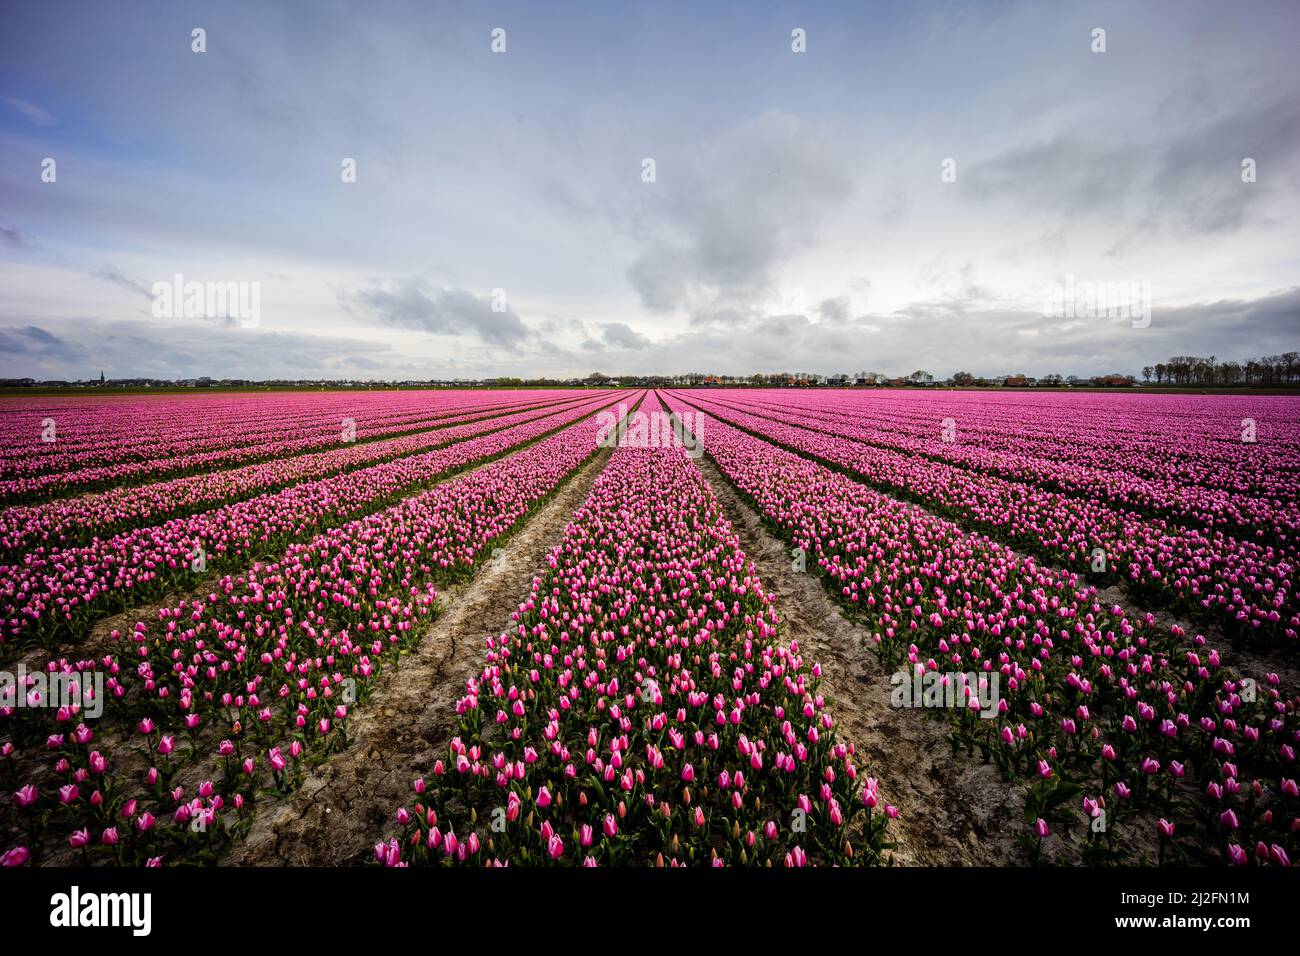 2022-03-31 08:12:42 31-03-2022, Zuid-Beijerland - Tulip fields in bloom on a field in Zuid-Beijerland. The tulips bloom early this year due to the beautiful sunny weather. Photo: ANP / Hollandse Hoogte / Jeffrey Groeneweg netherlands out - belgium out Stock Photo